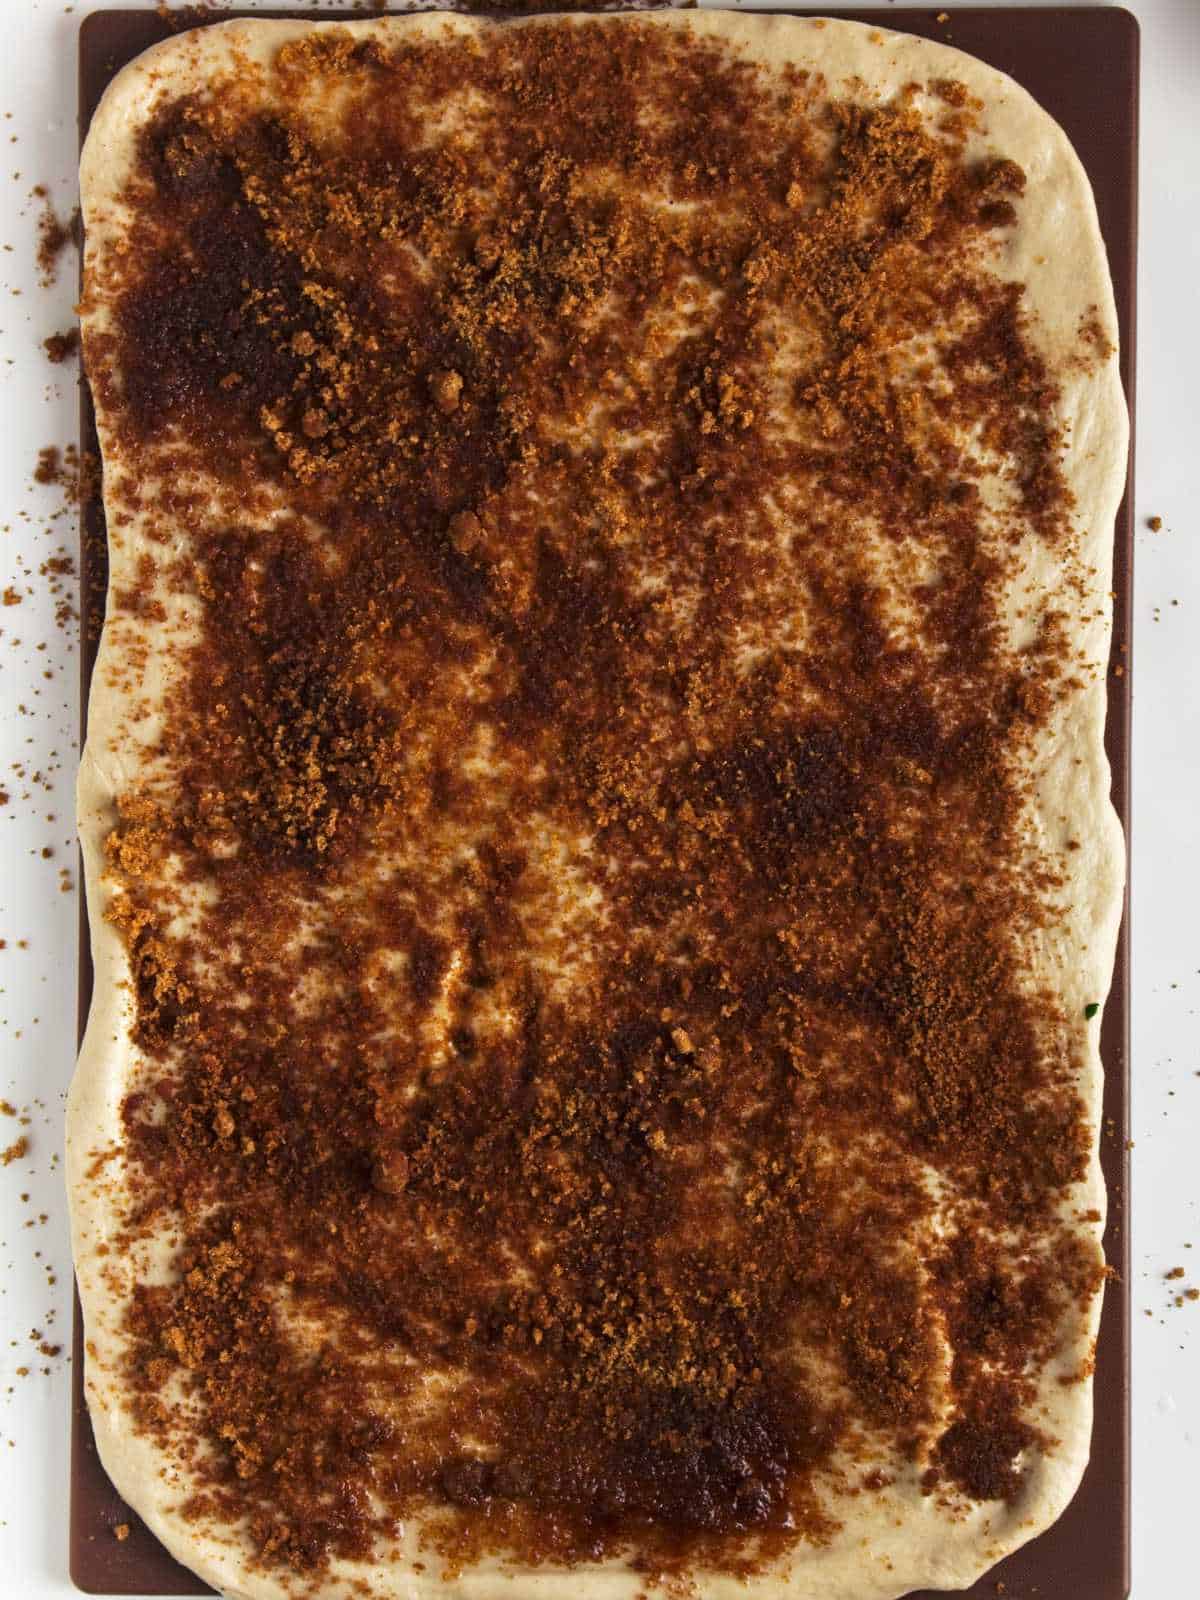 cinnamon sugar spread out on large dough rectangle.